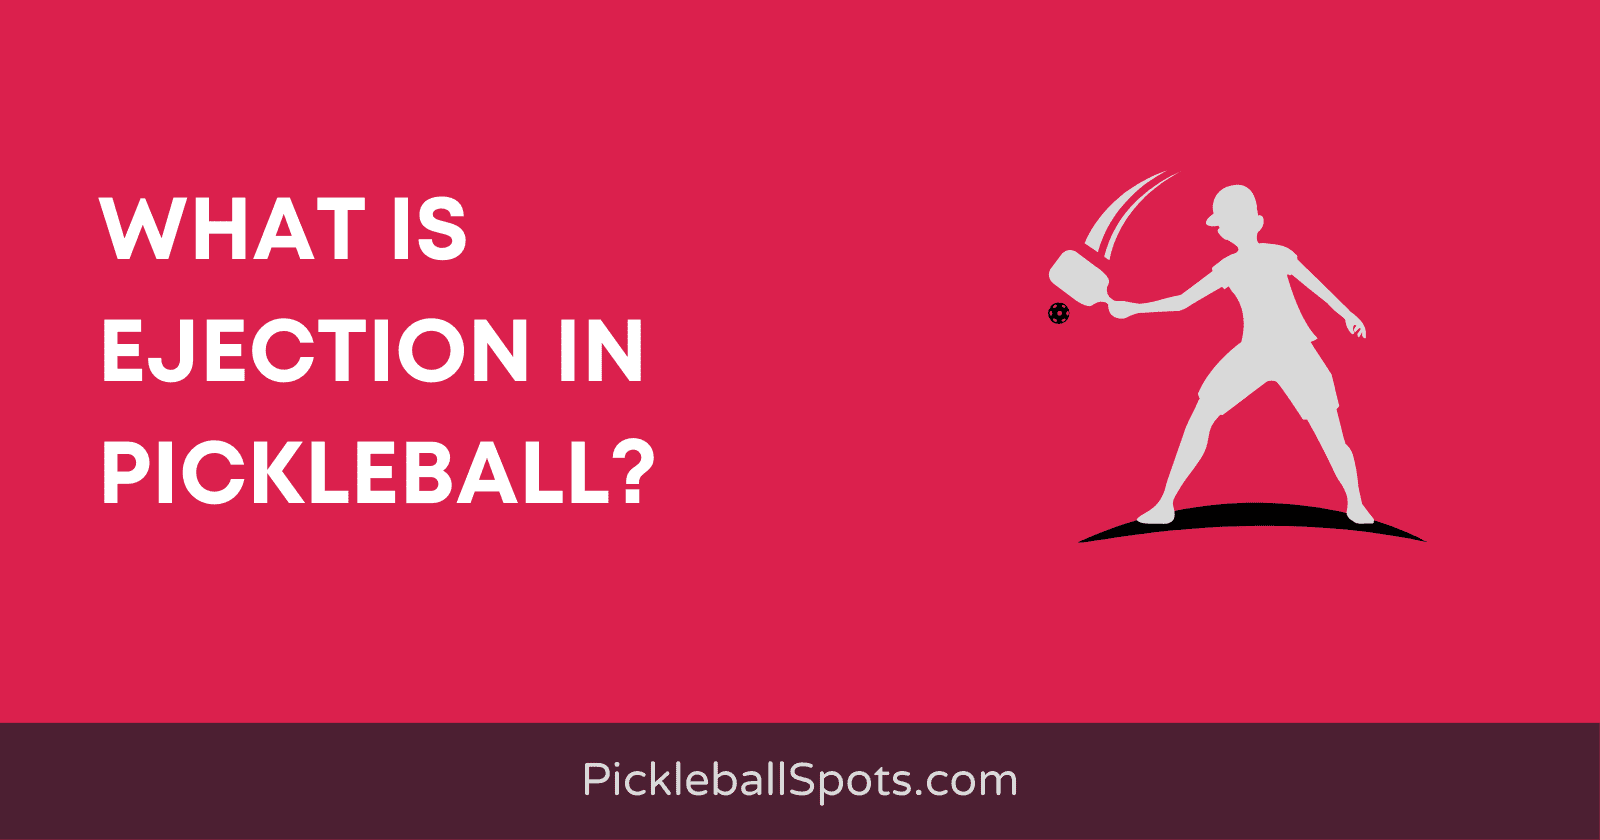 What Is Ejection In Pickleball